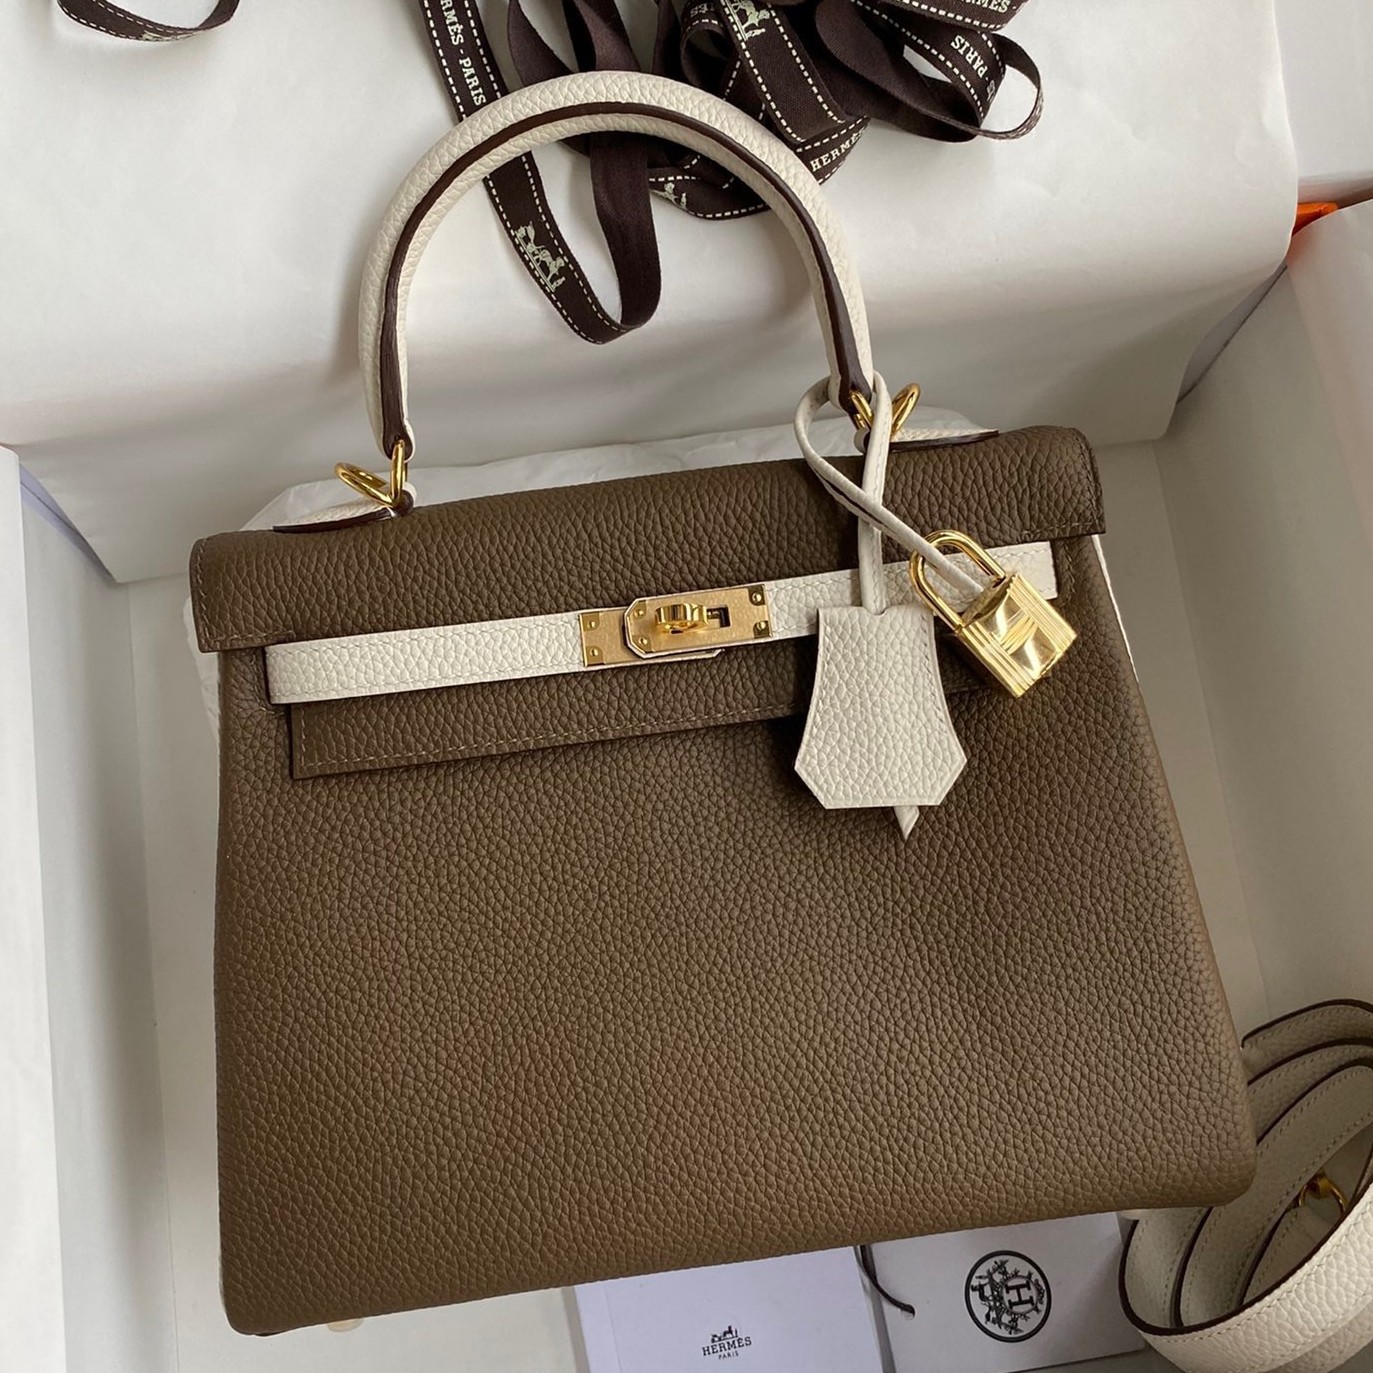 Replica Hermes Kelly Retourne 25 Bicolor Bag in Taupe and Craie ...